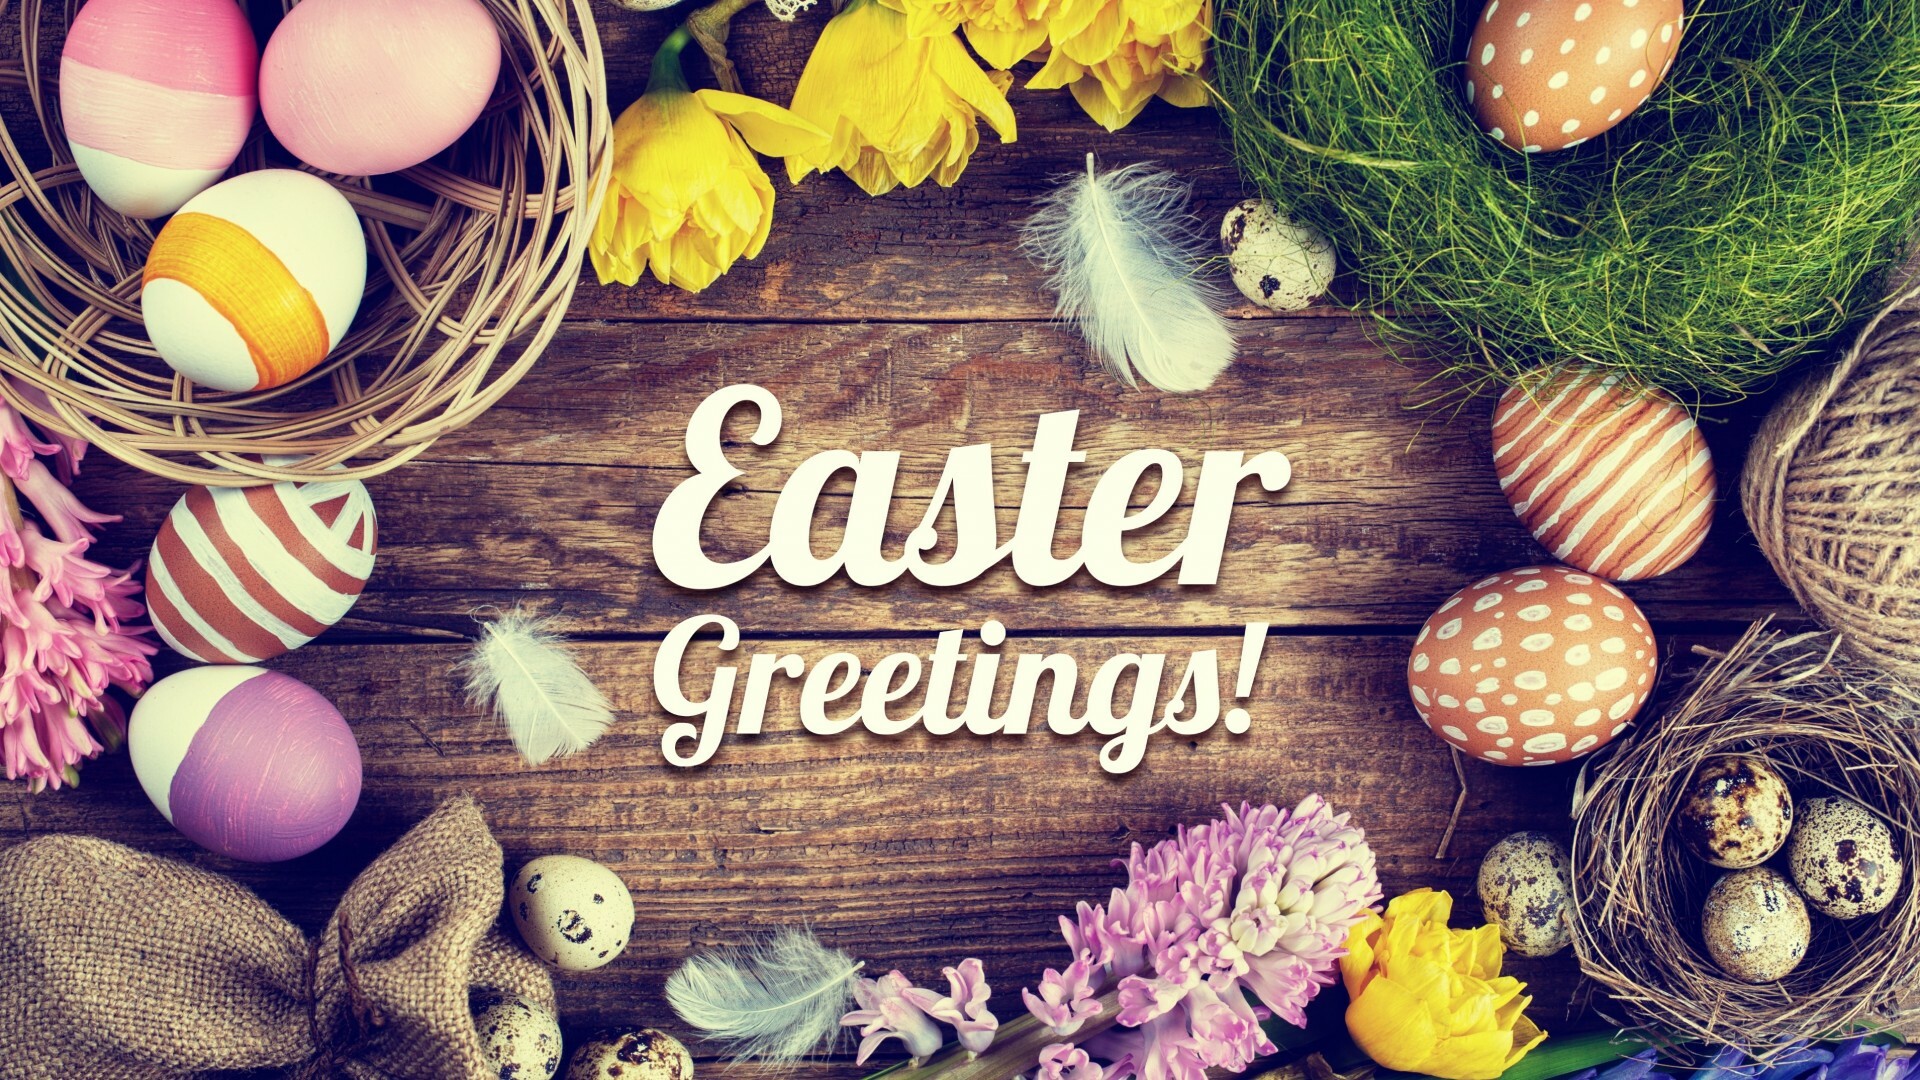 Easter: One of the principal holidays, or feasts, of Christianity. 1920x1080 Full HD Wallpaper.